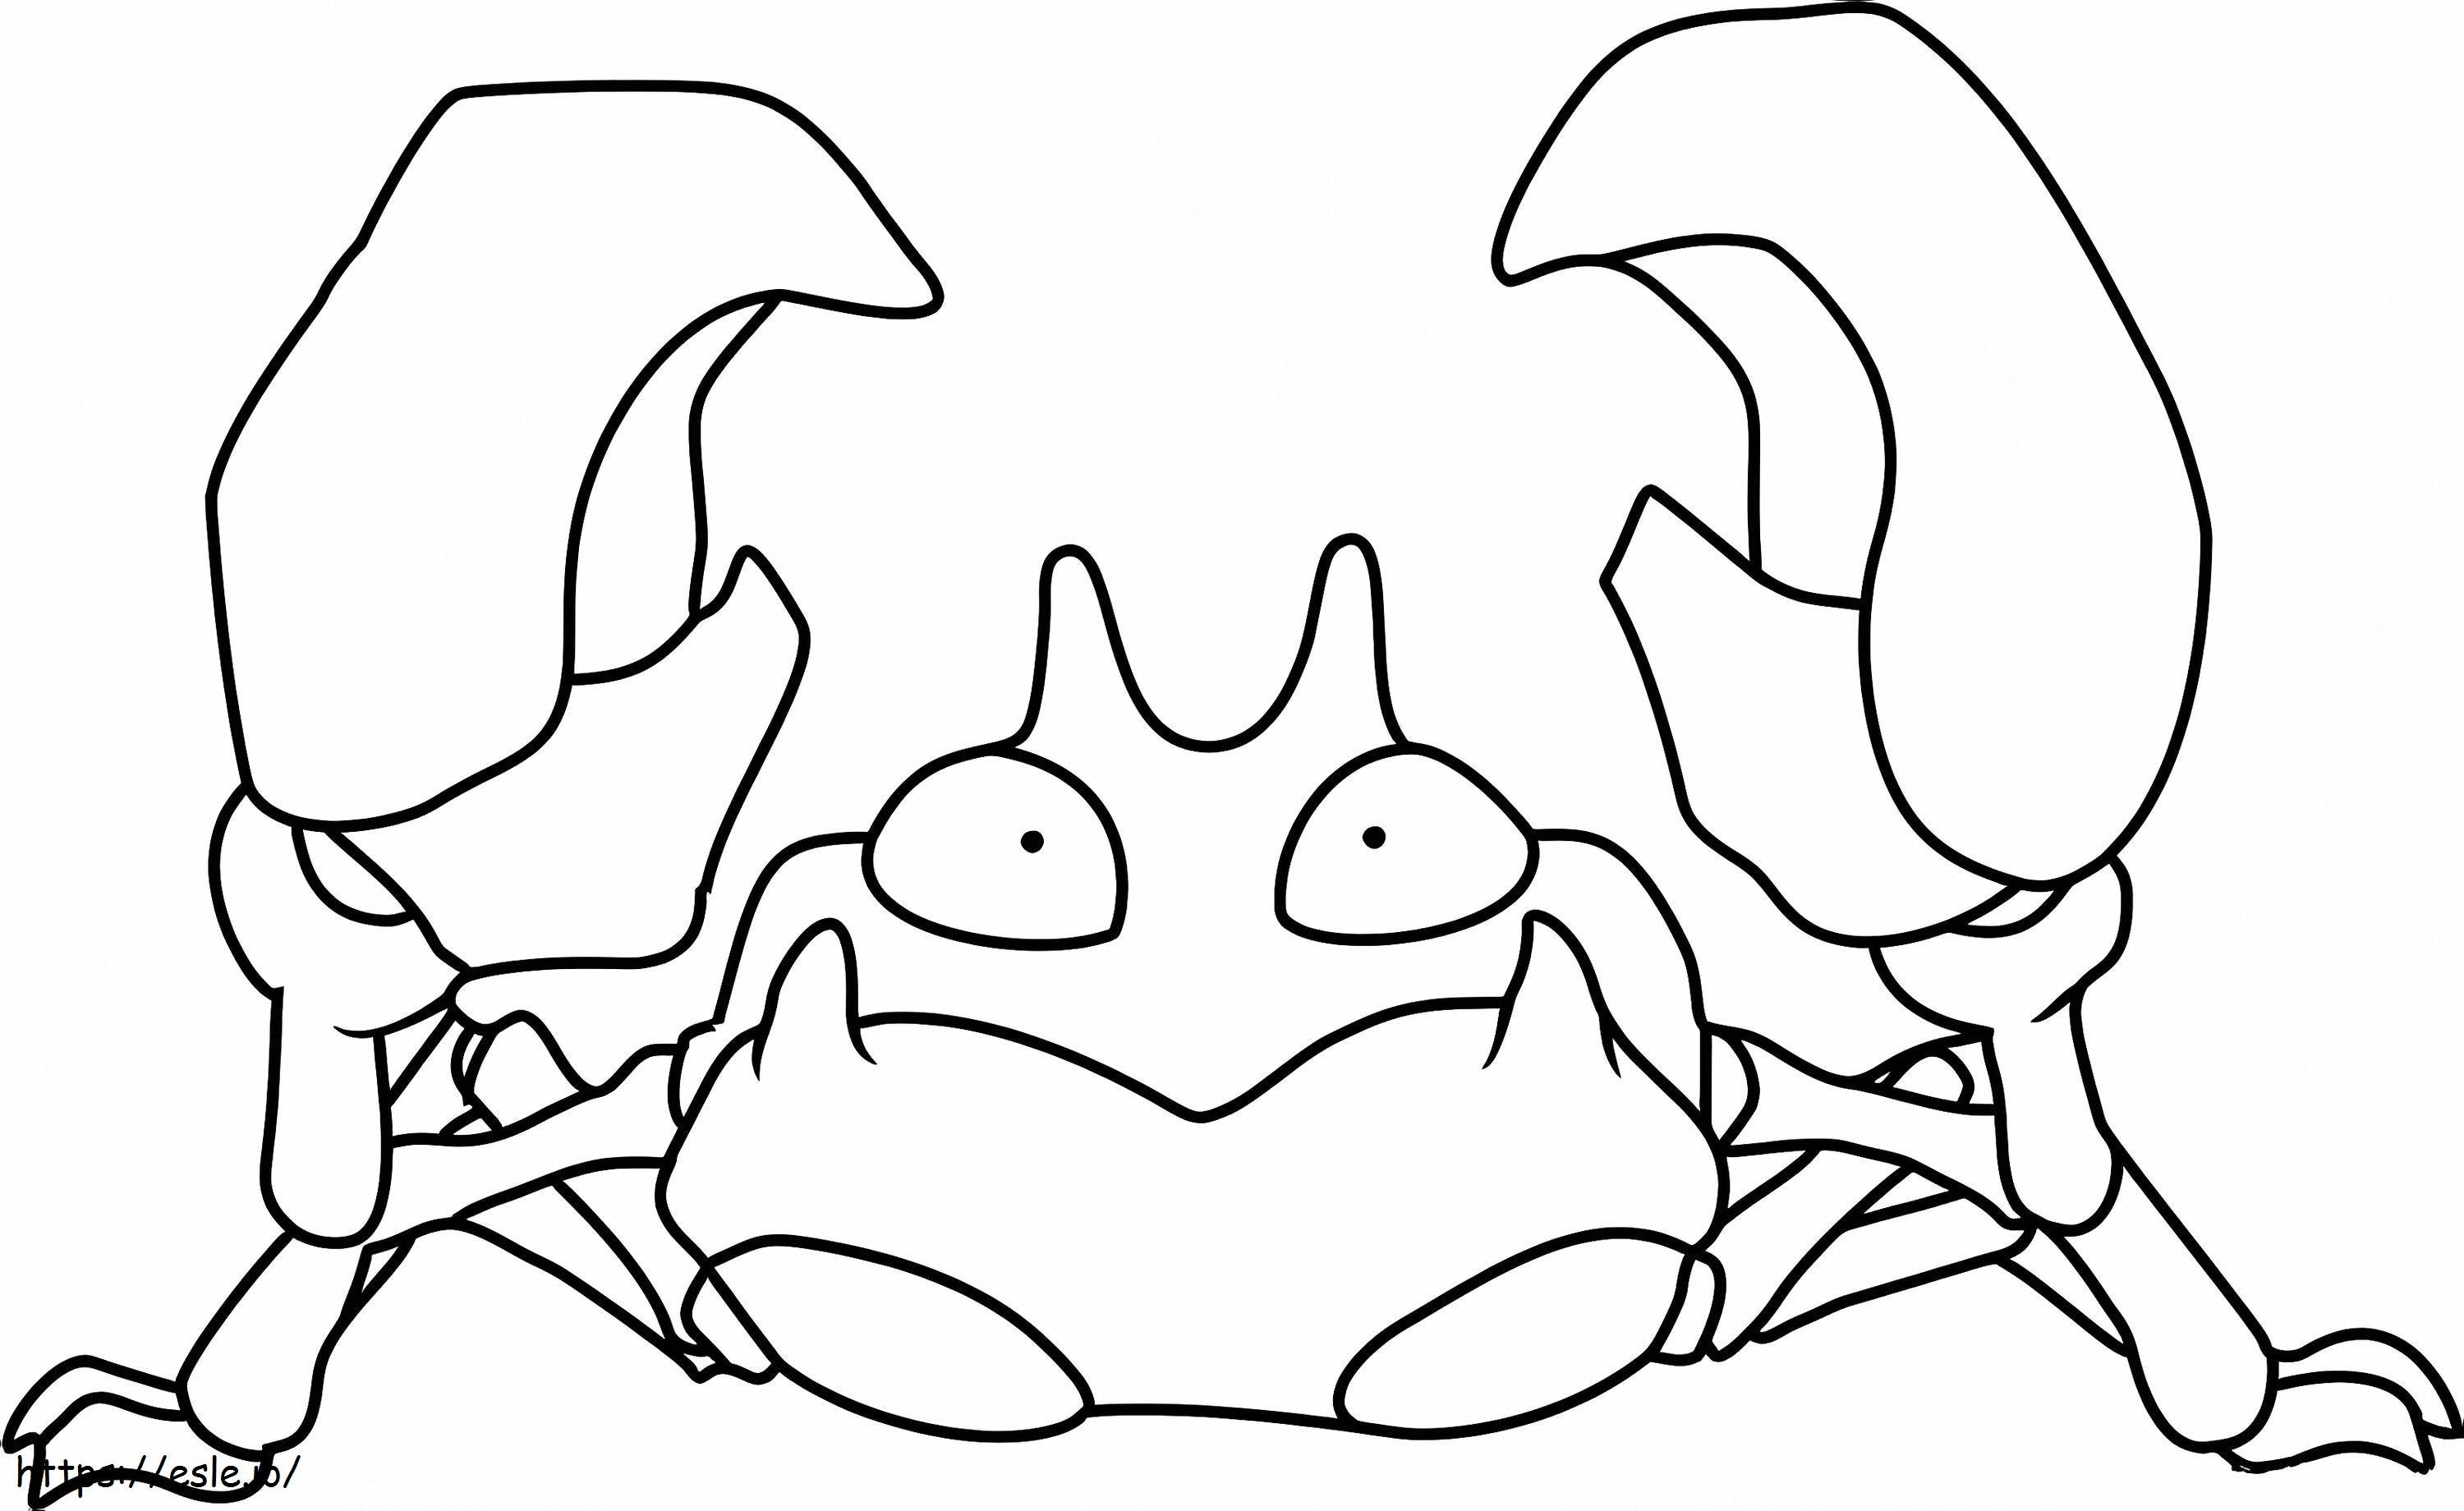 Krabby 2 coloring page